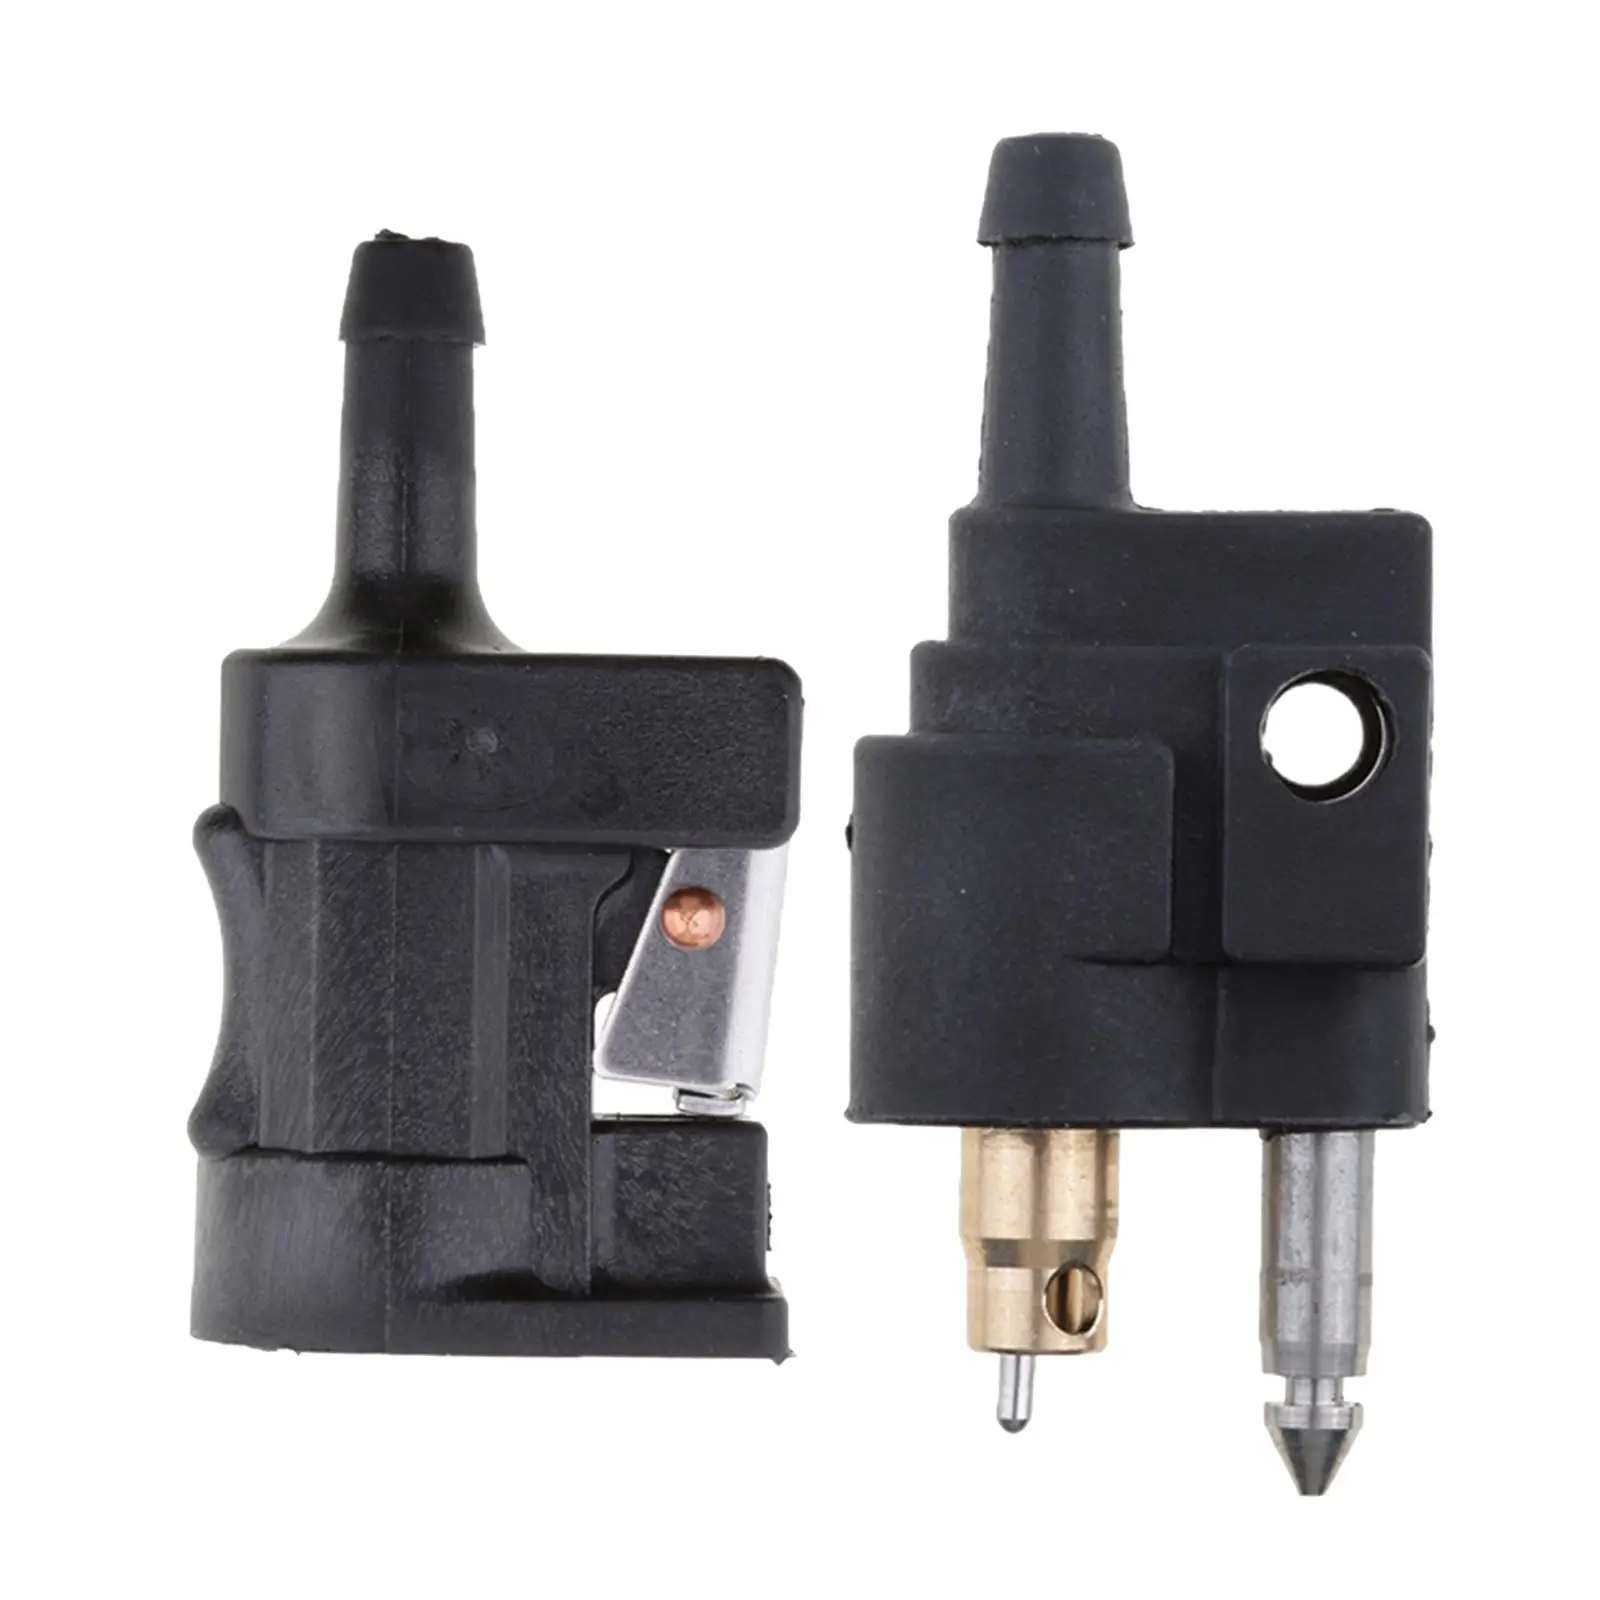 6mm Line Connector Fittings Compatible with Outboard Motor Fuel